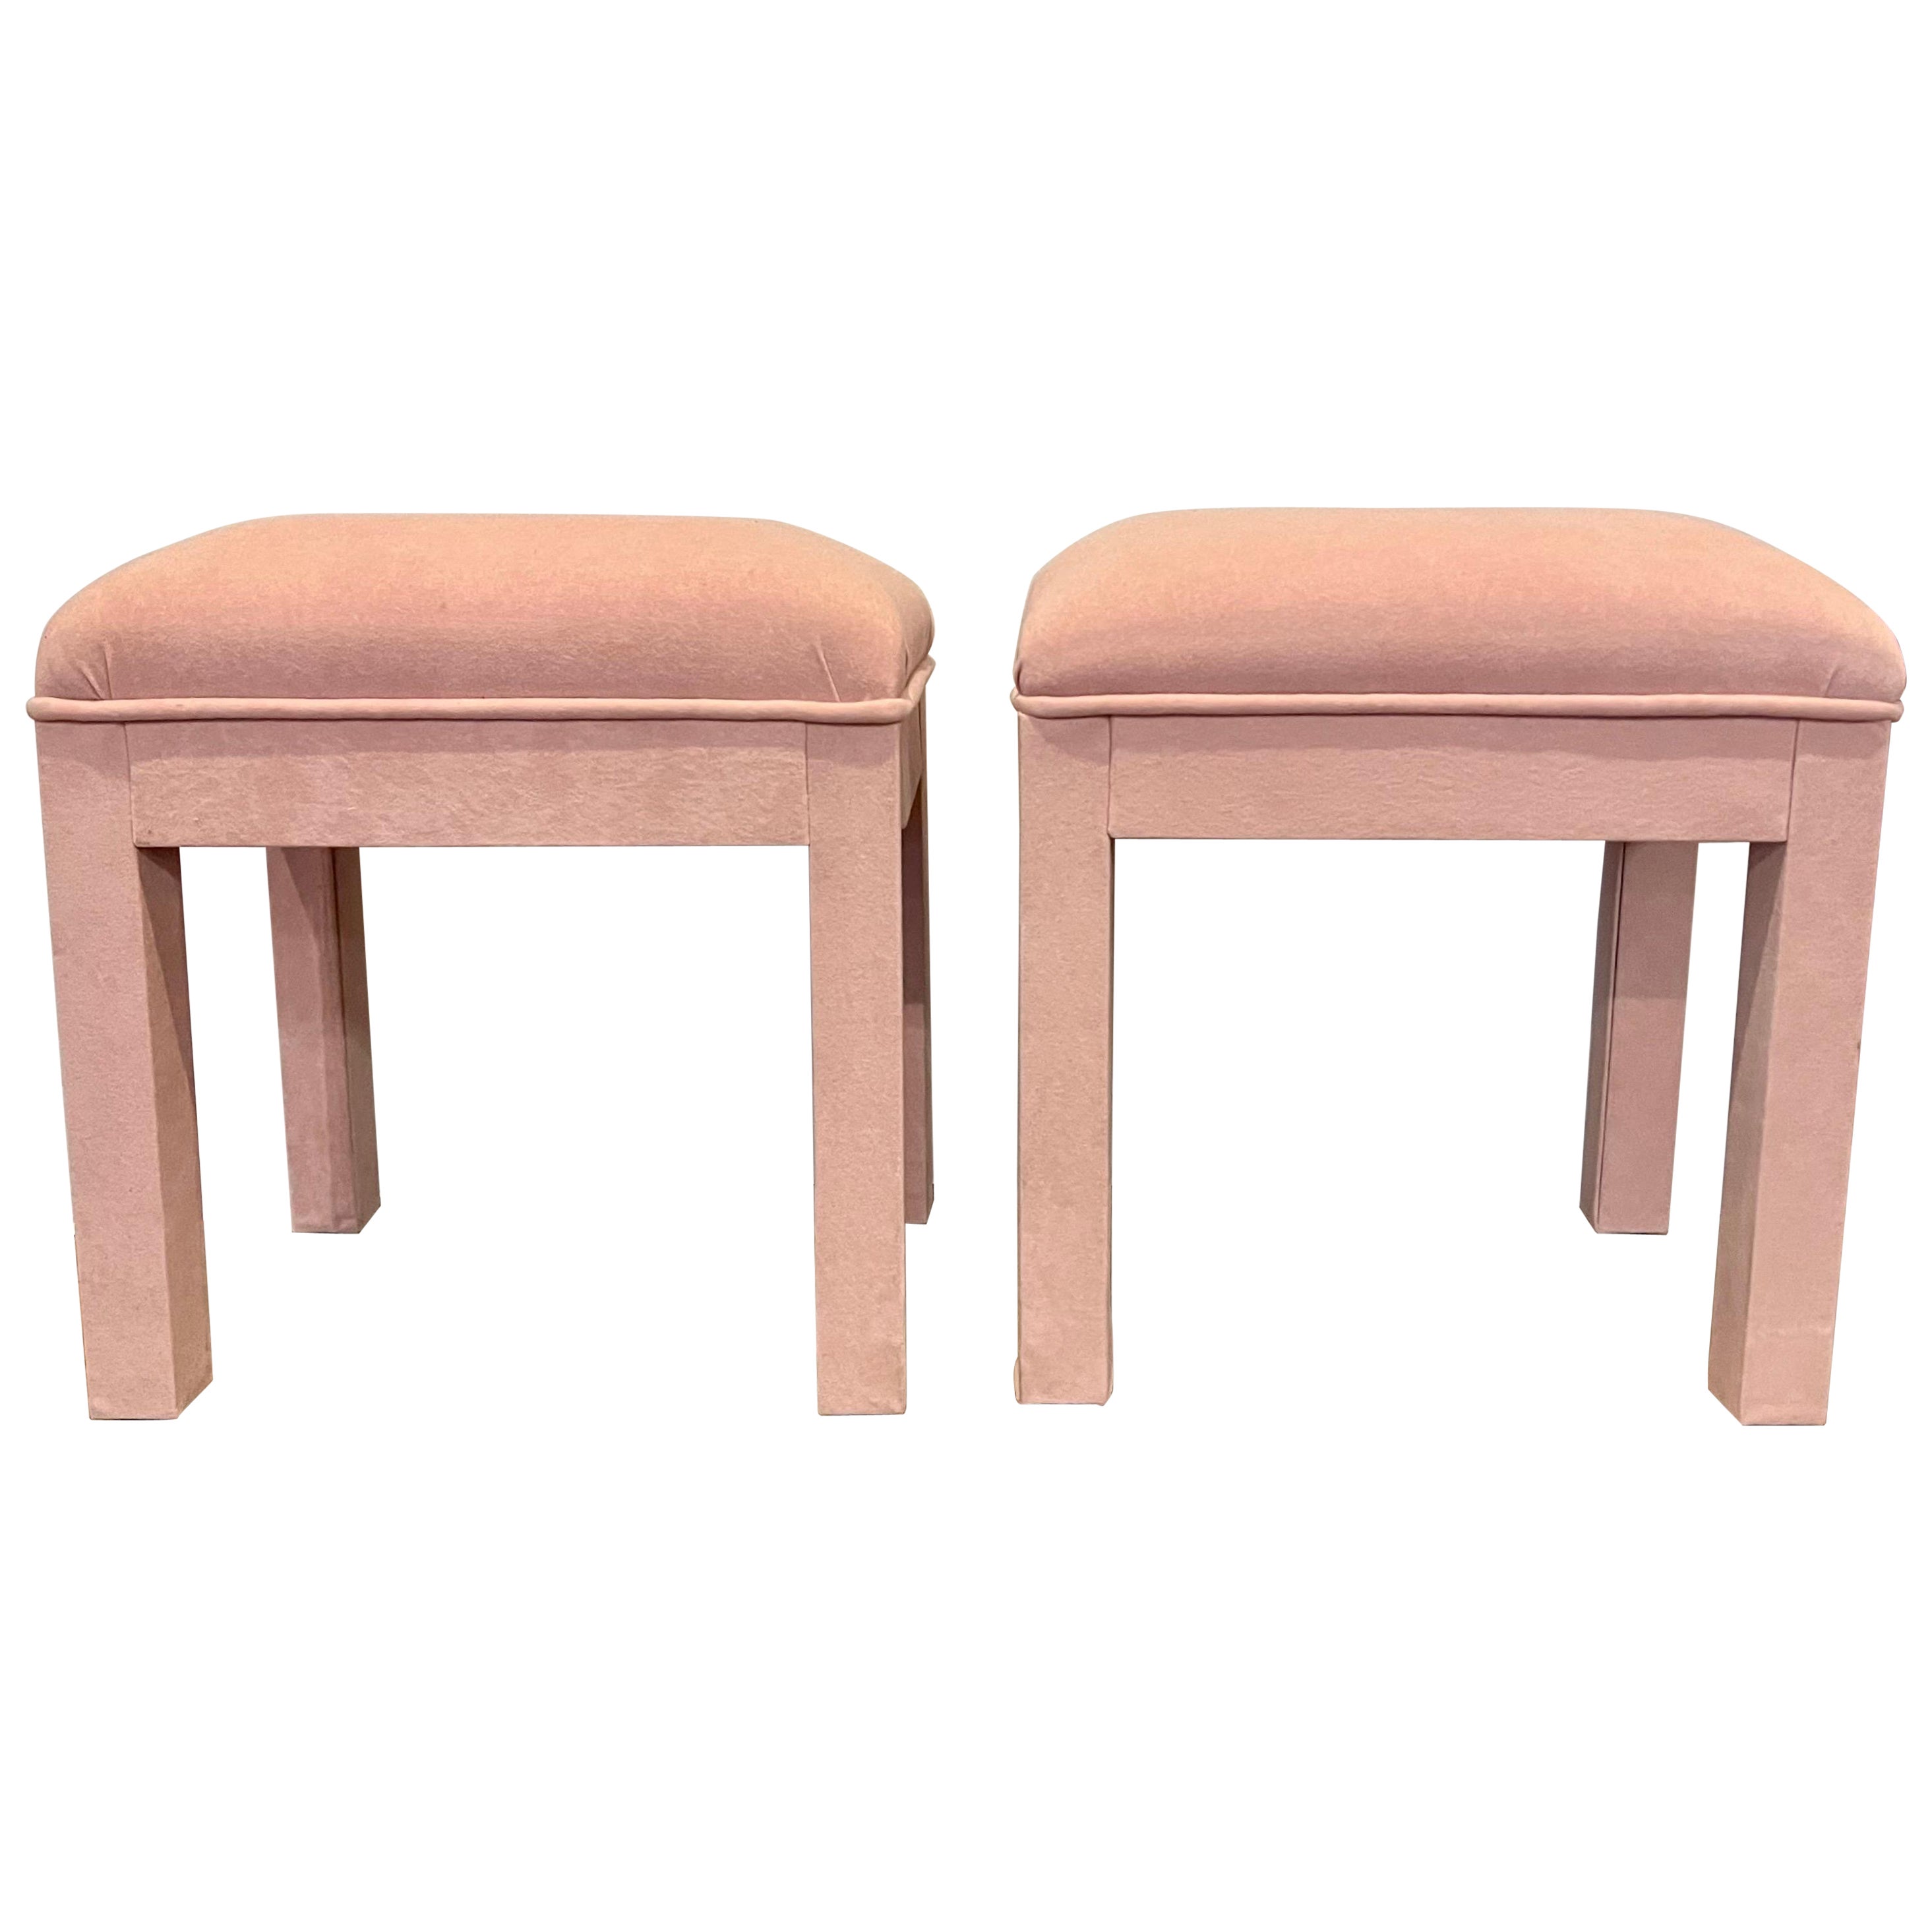 Pair of Vintage Midcentury Small Pink Upholstered Parsons Stools